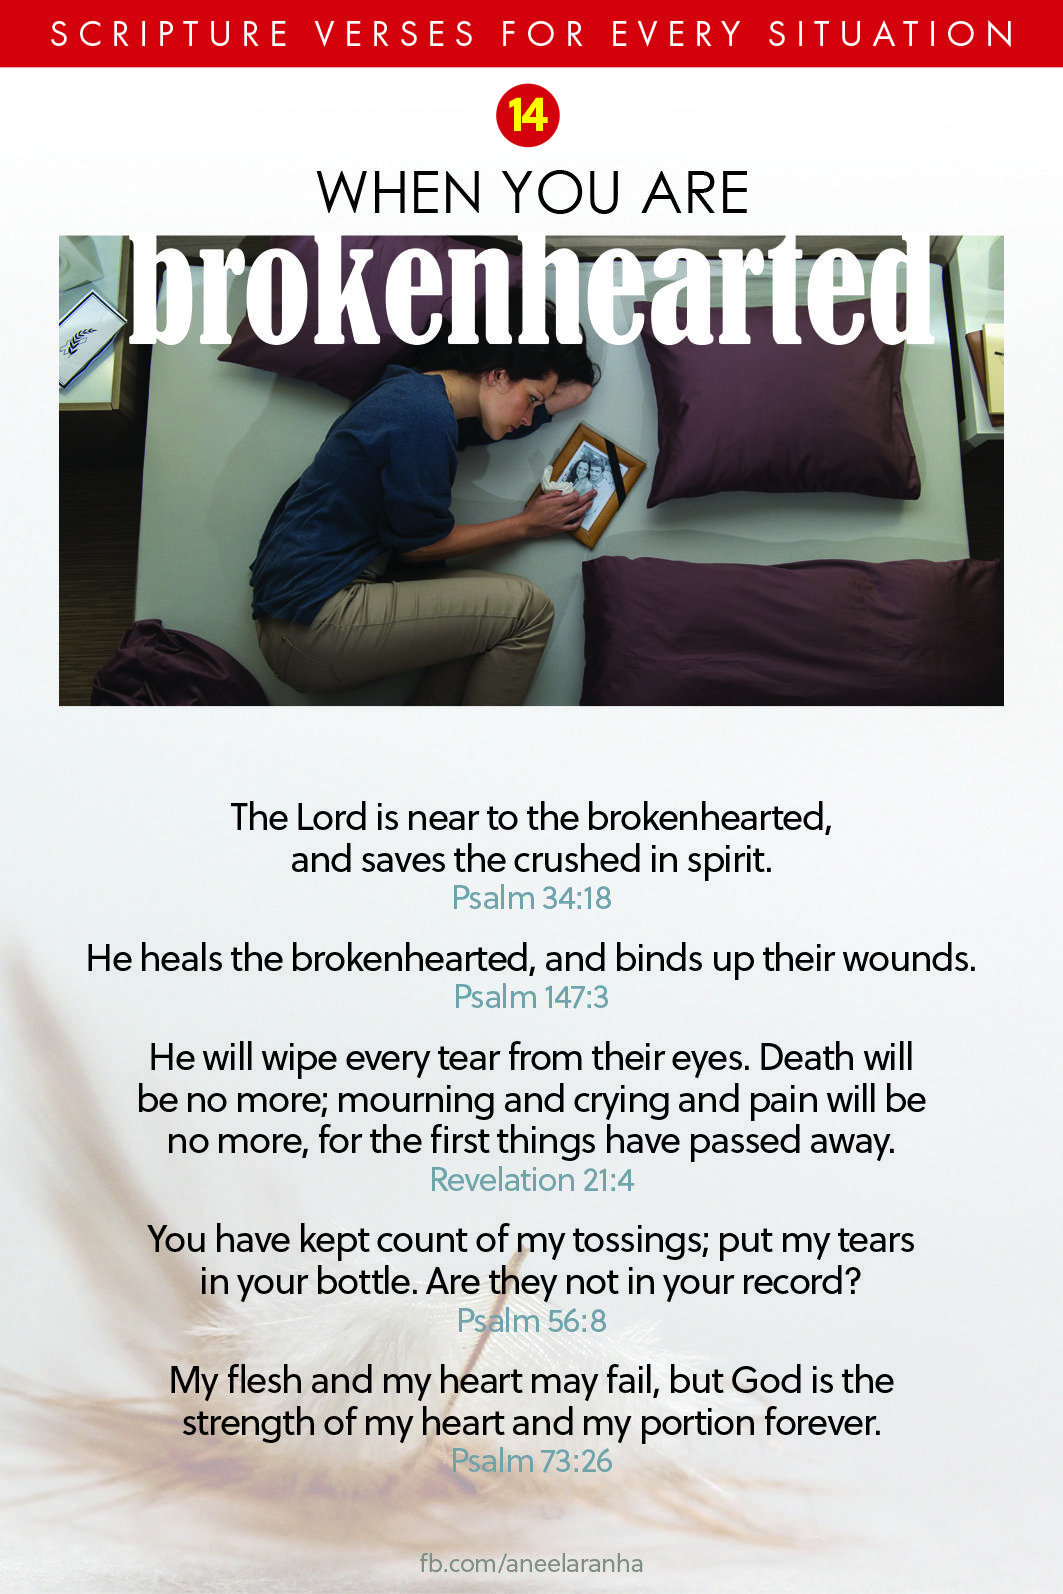 14. Are you brokenhearted?